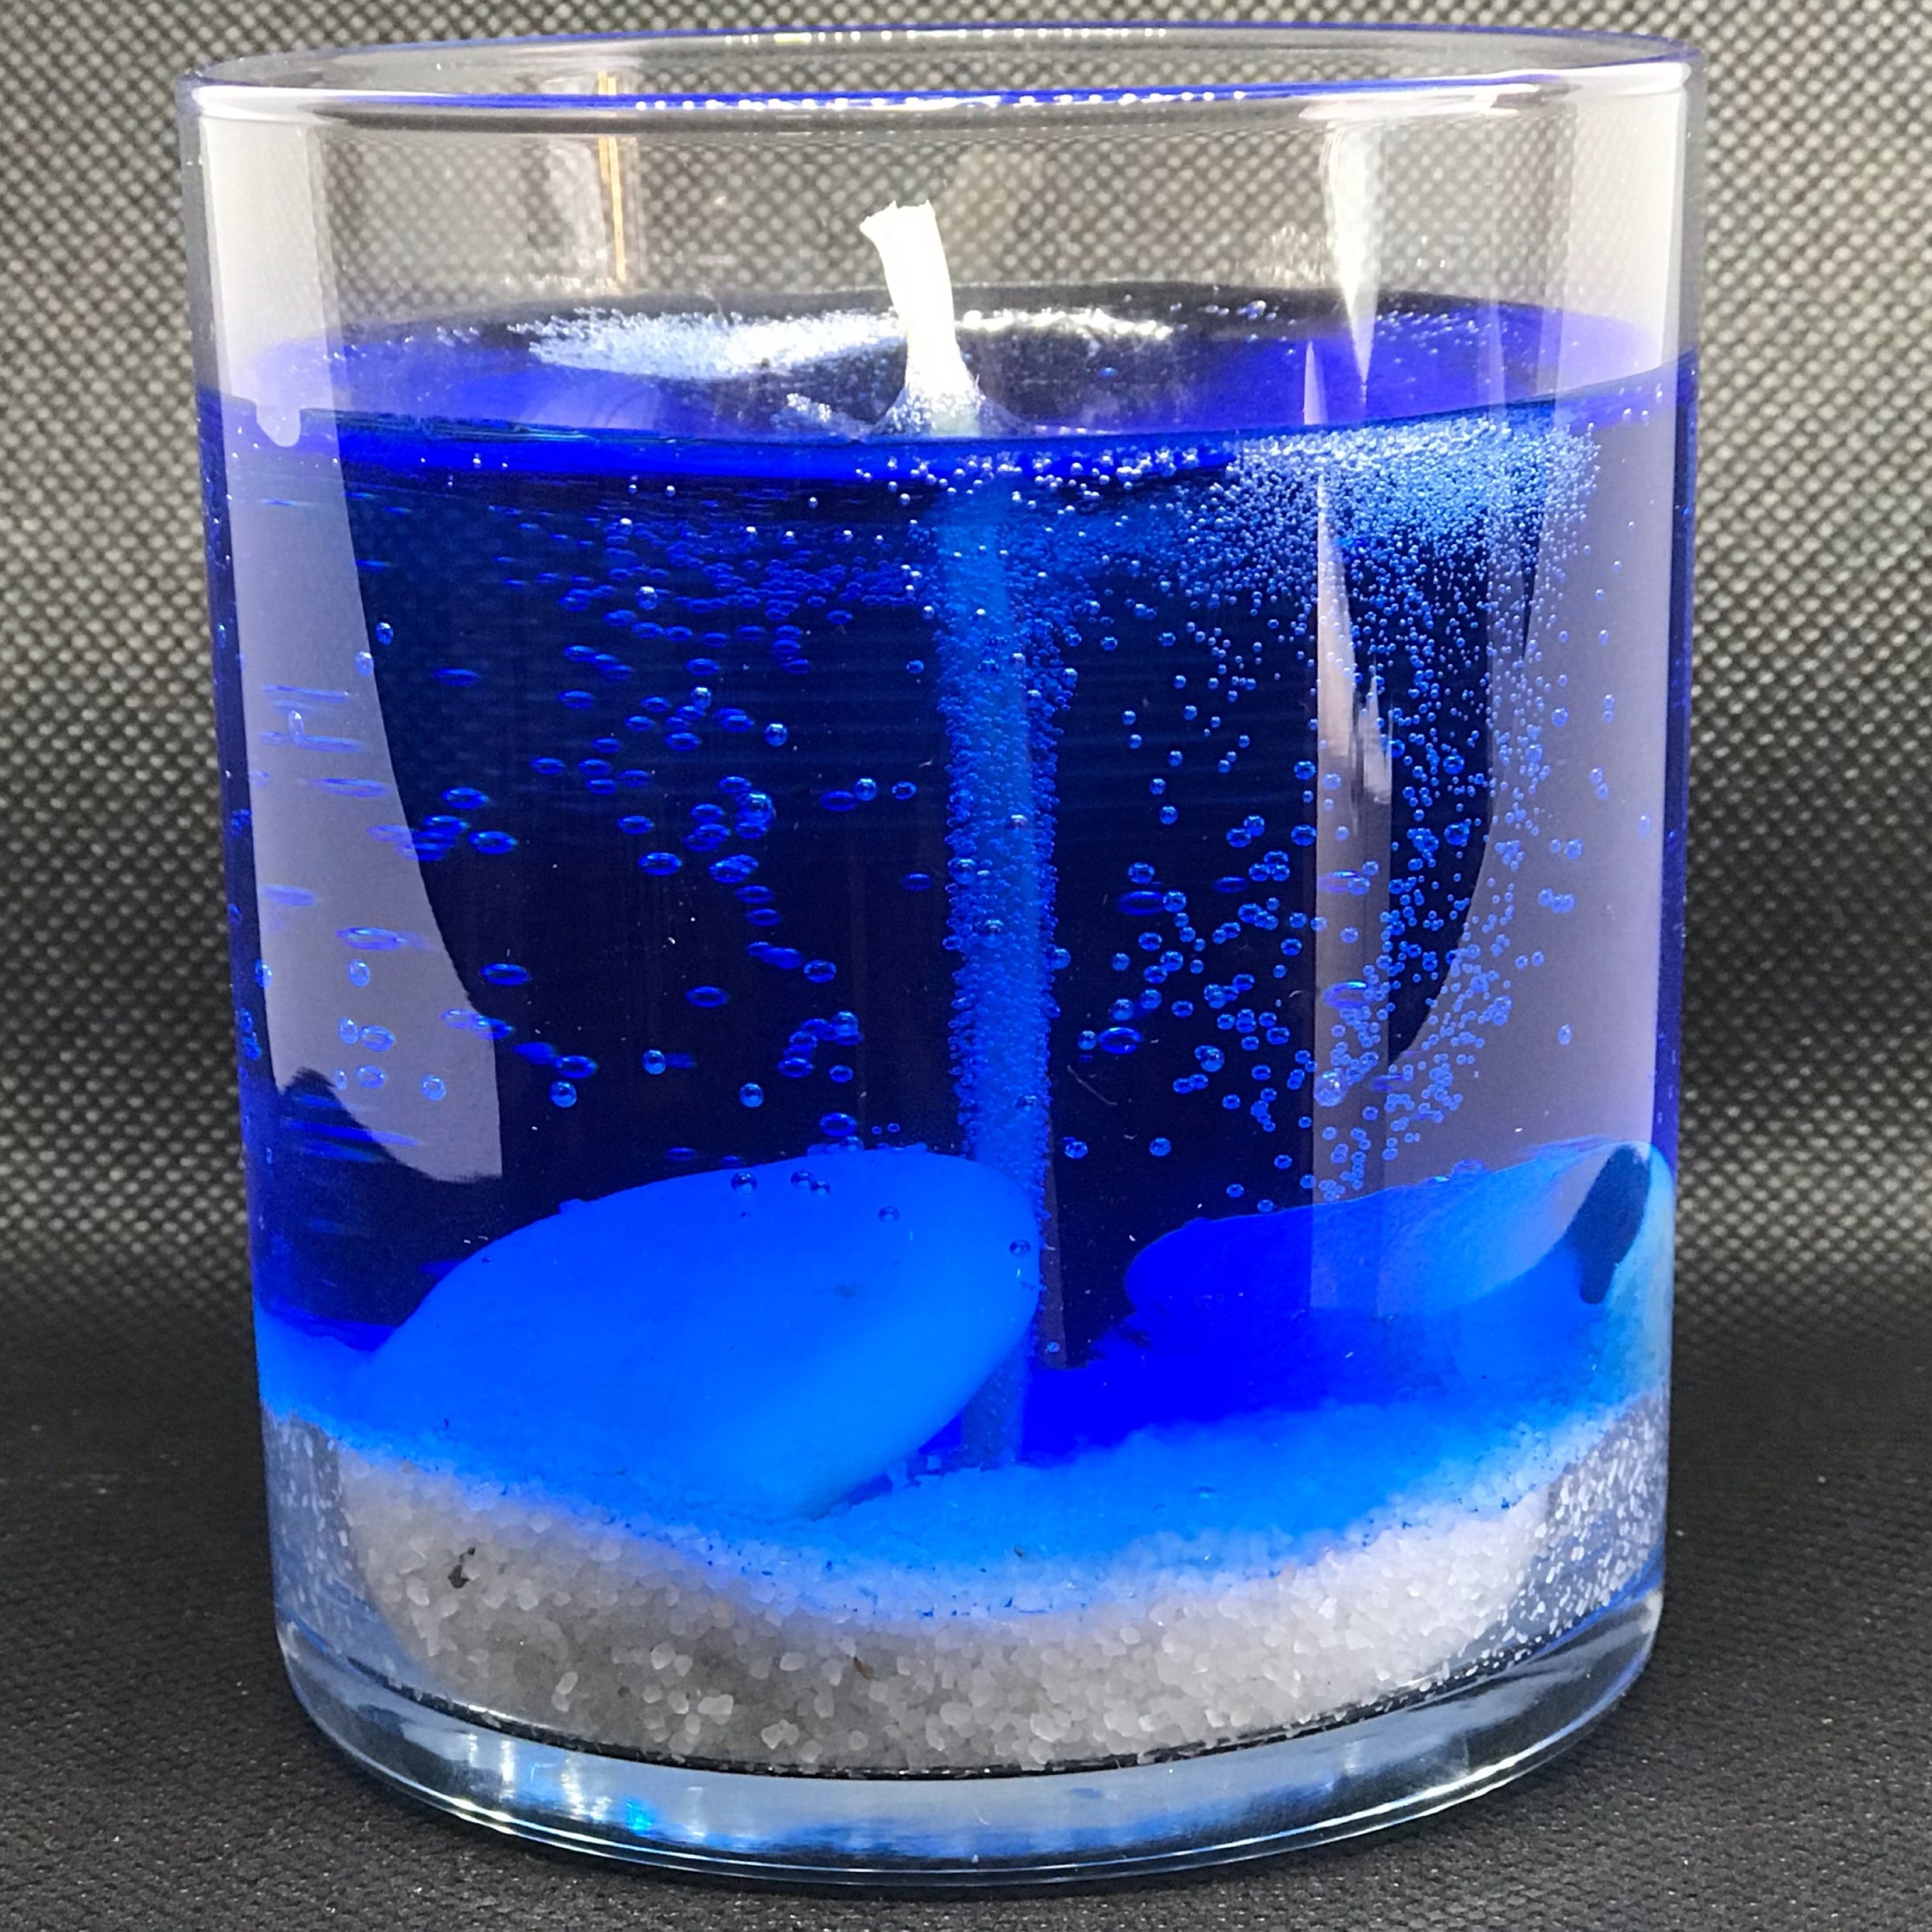 Scented Gel Wax Candle Shelly Beach 7.7 ounce | Handmade & Eco-Friendly  White Decorative Glass Relaxing Calming & Stress Reliever Candles for Home